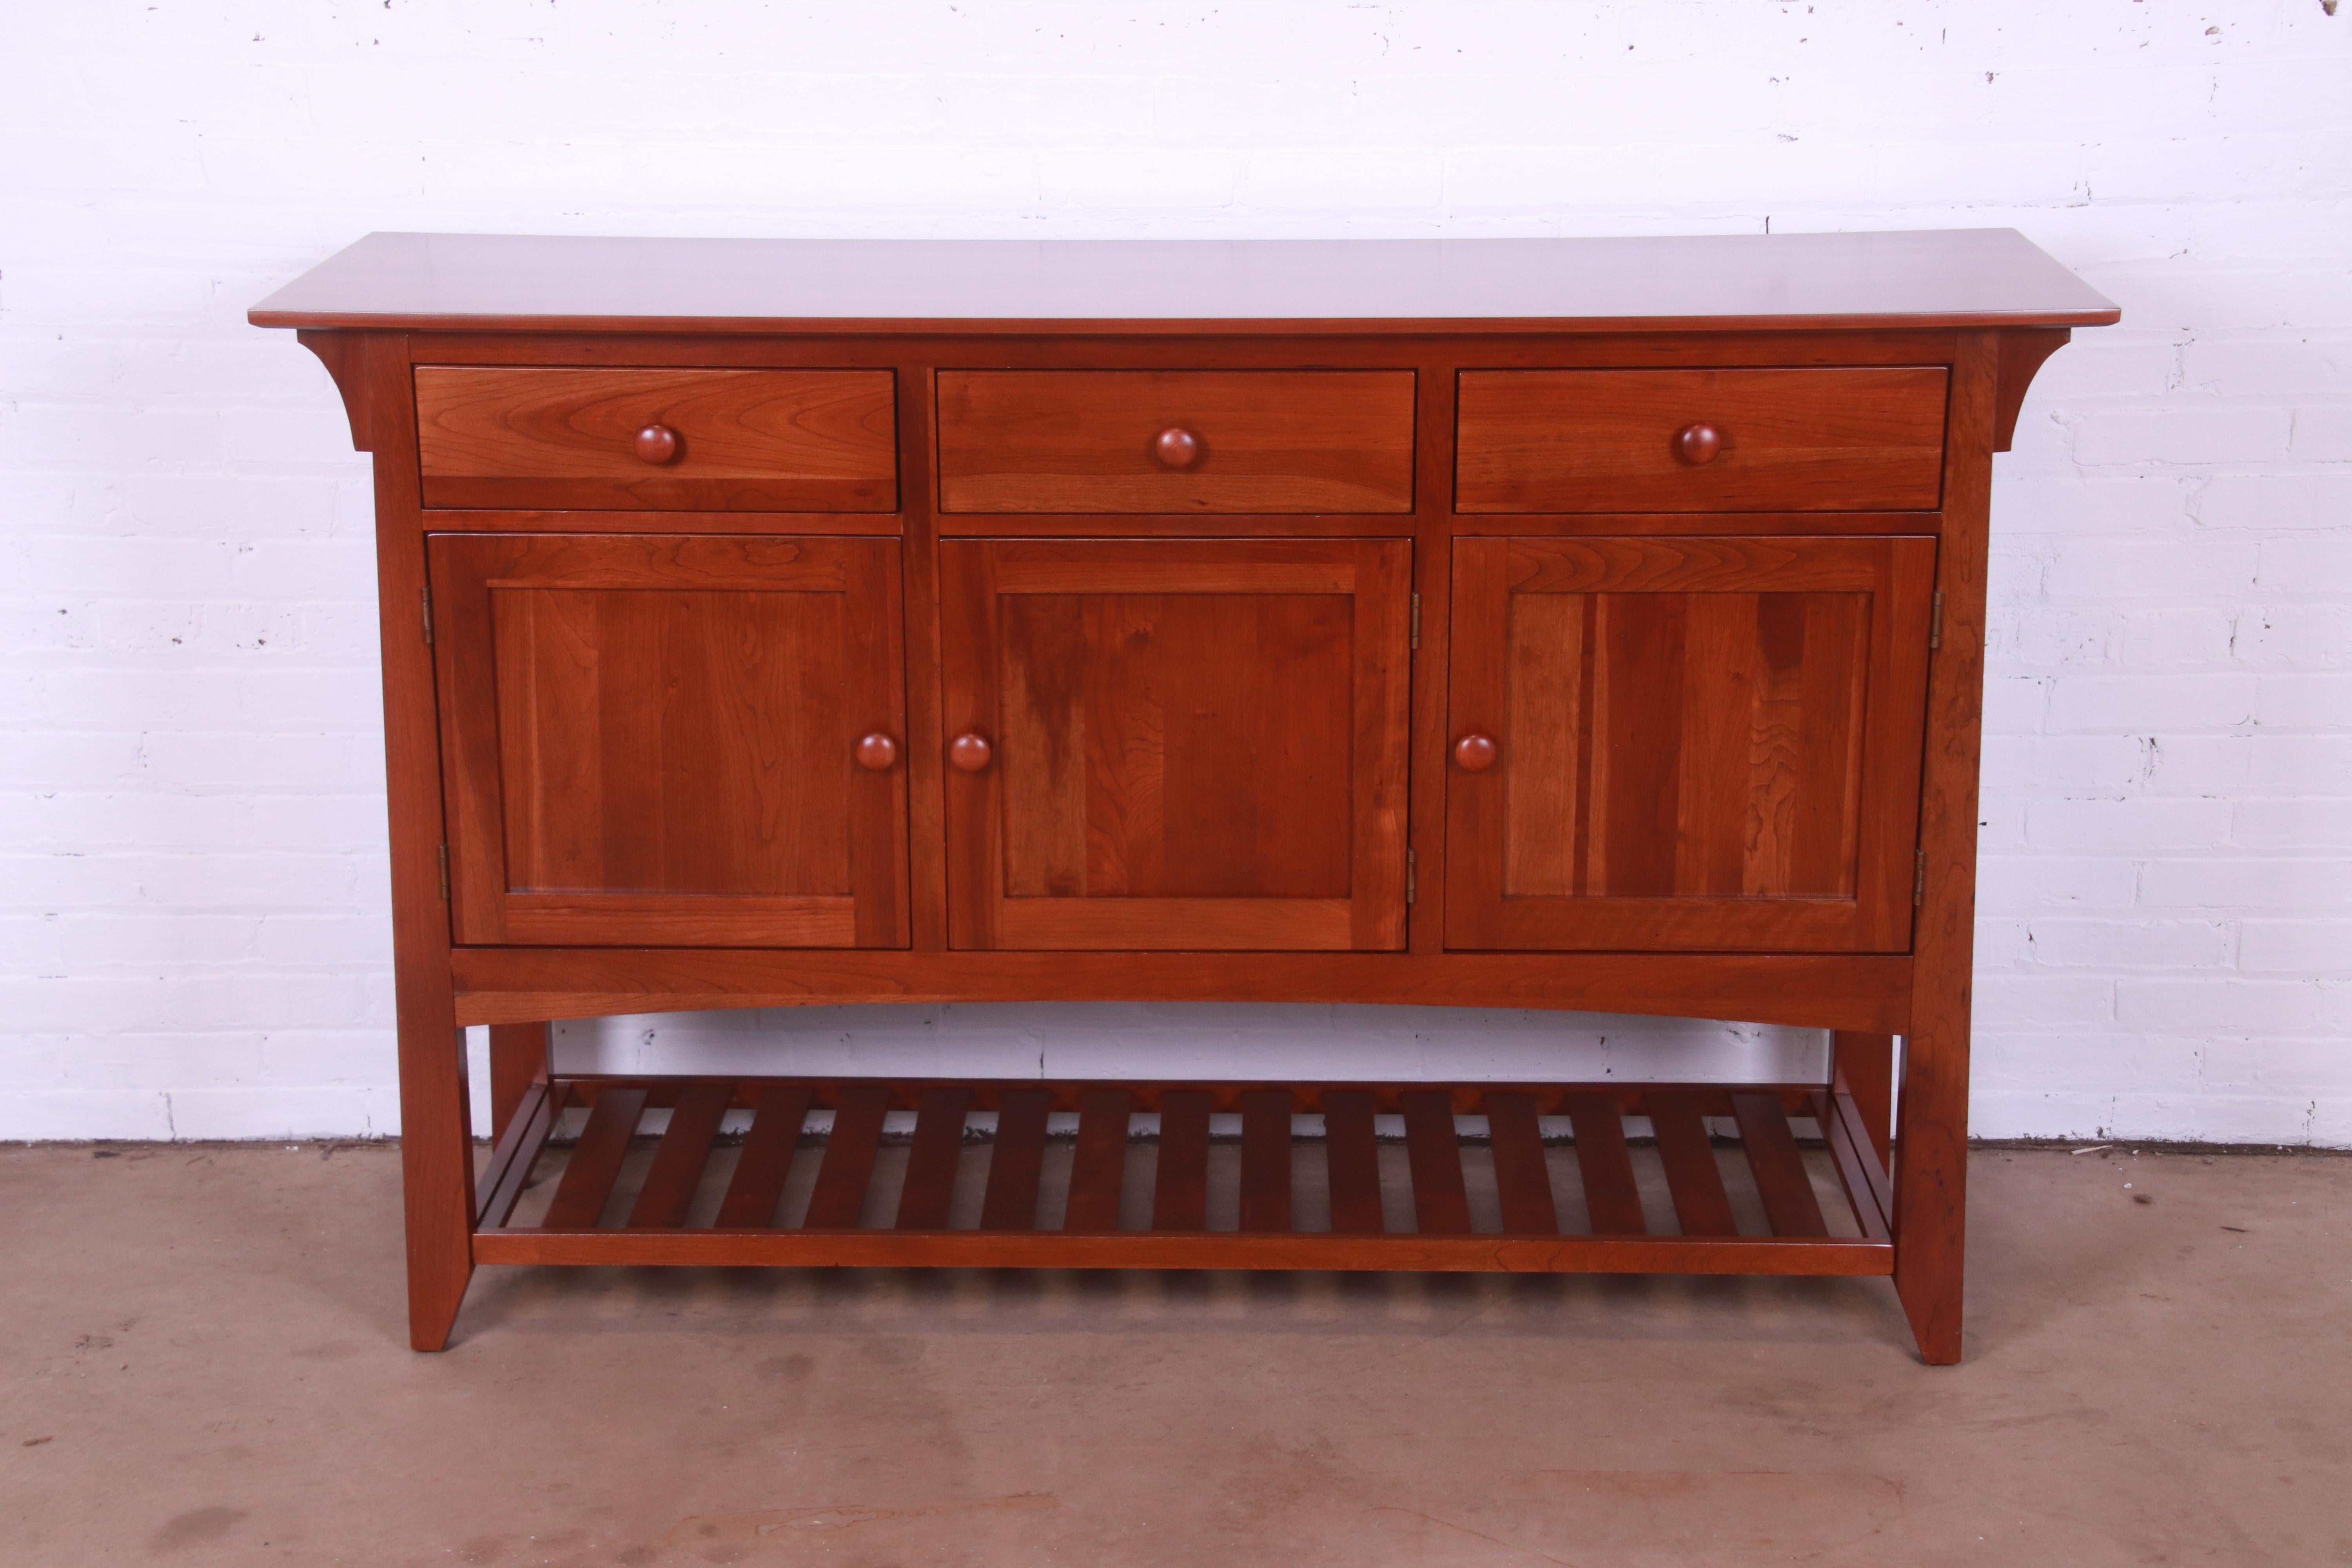 A gorgeous Arts & Crafts or Shaker style cherry wood sideboard, credenza, or bar cabinet

By Ethan Allen, 